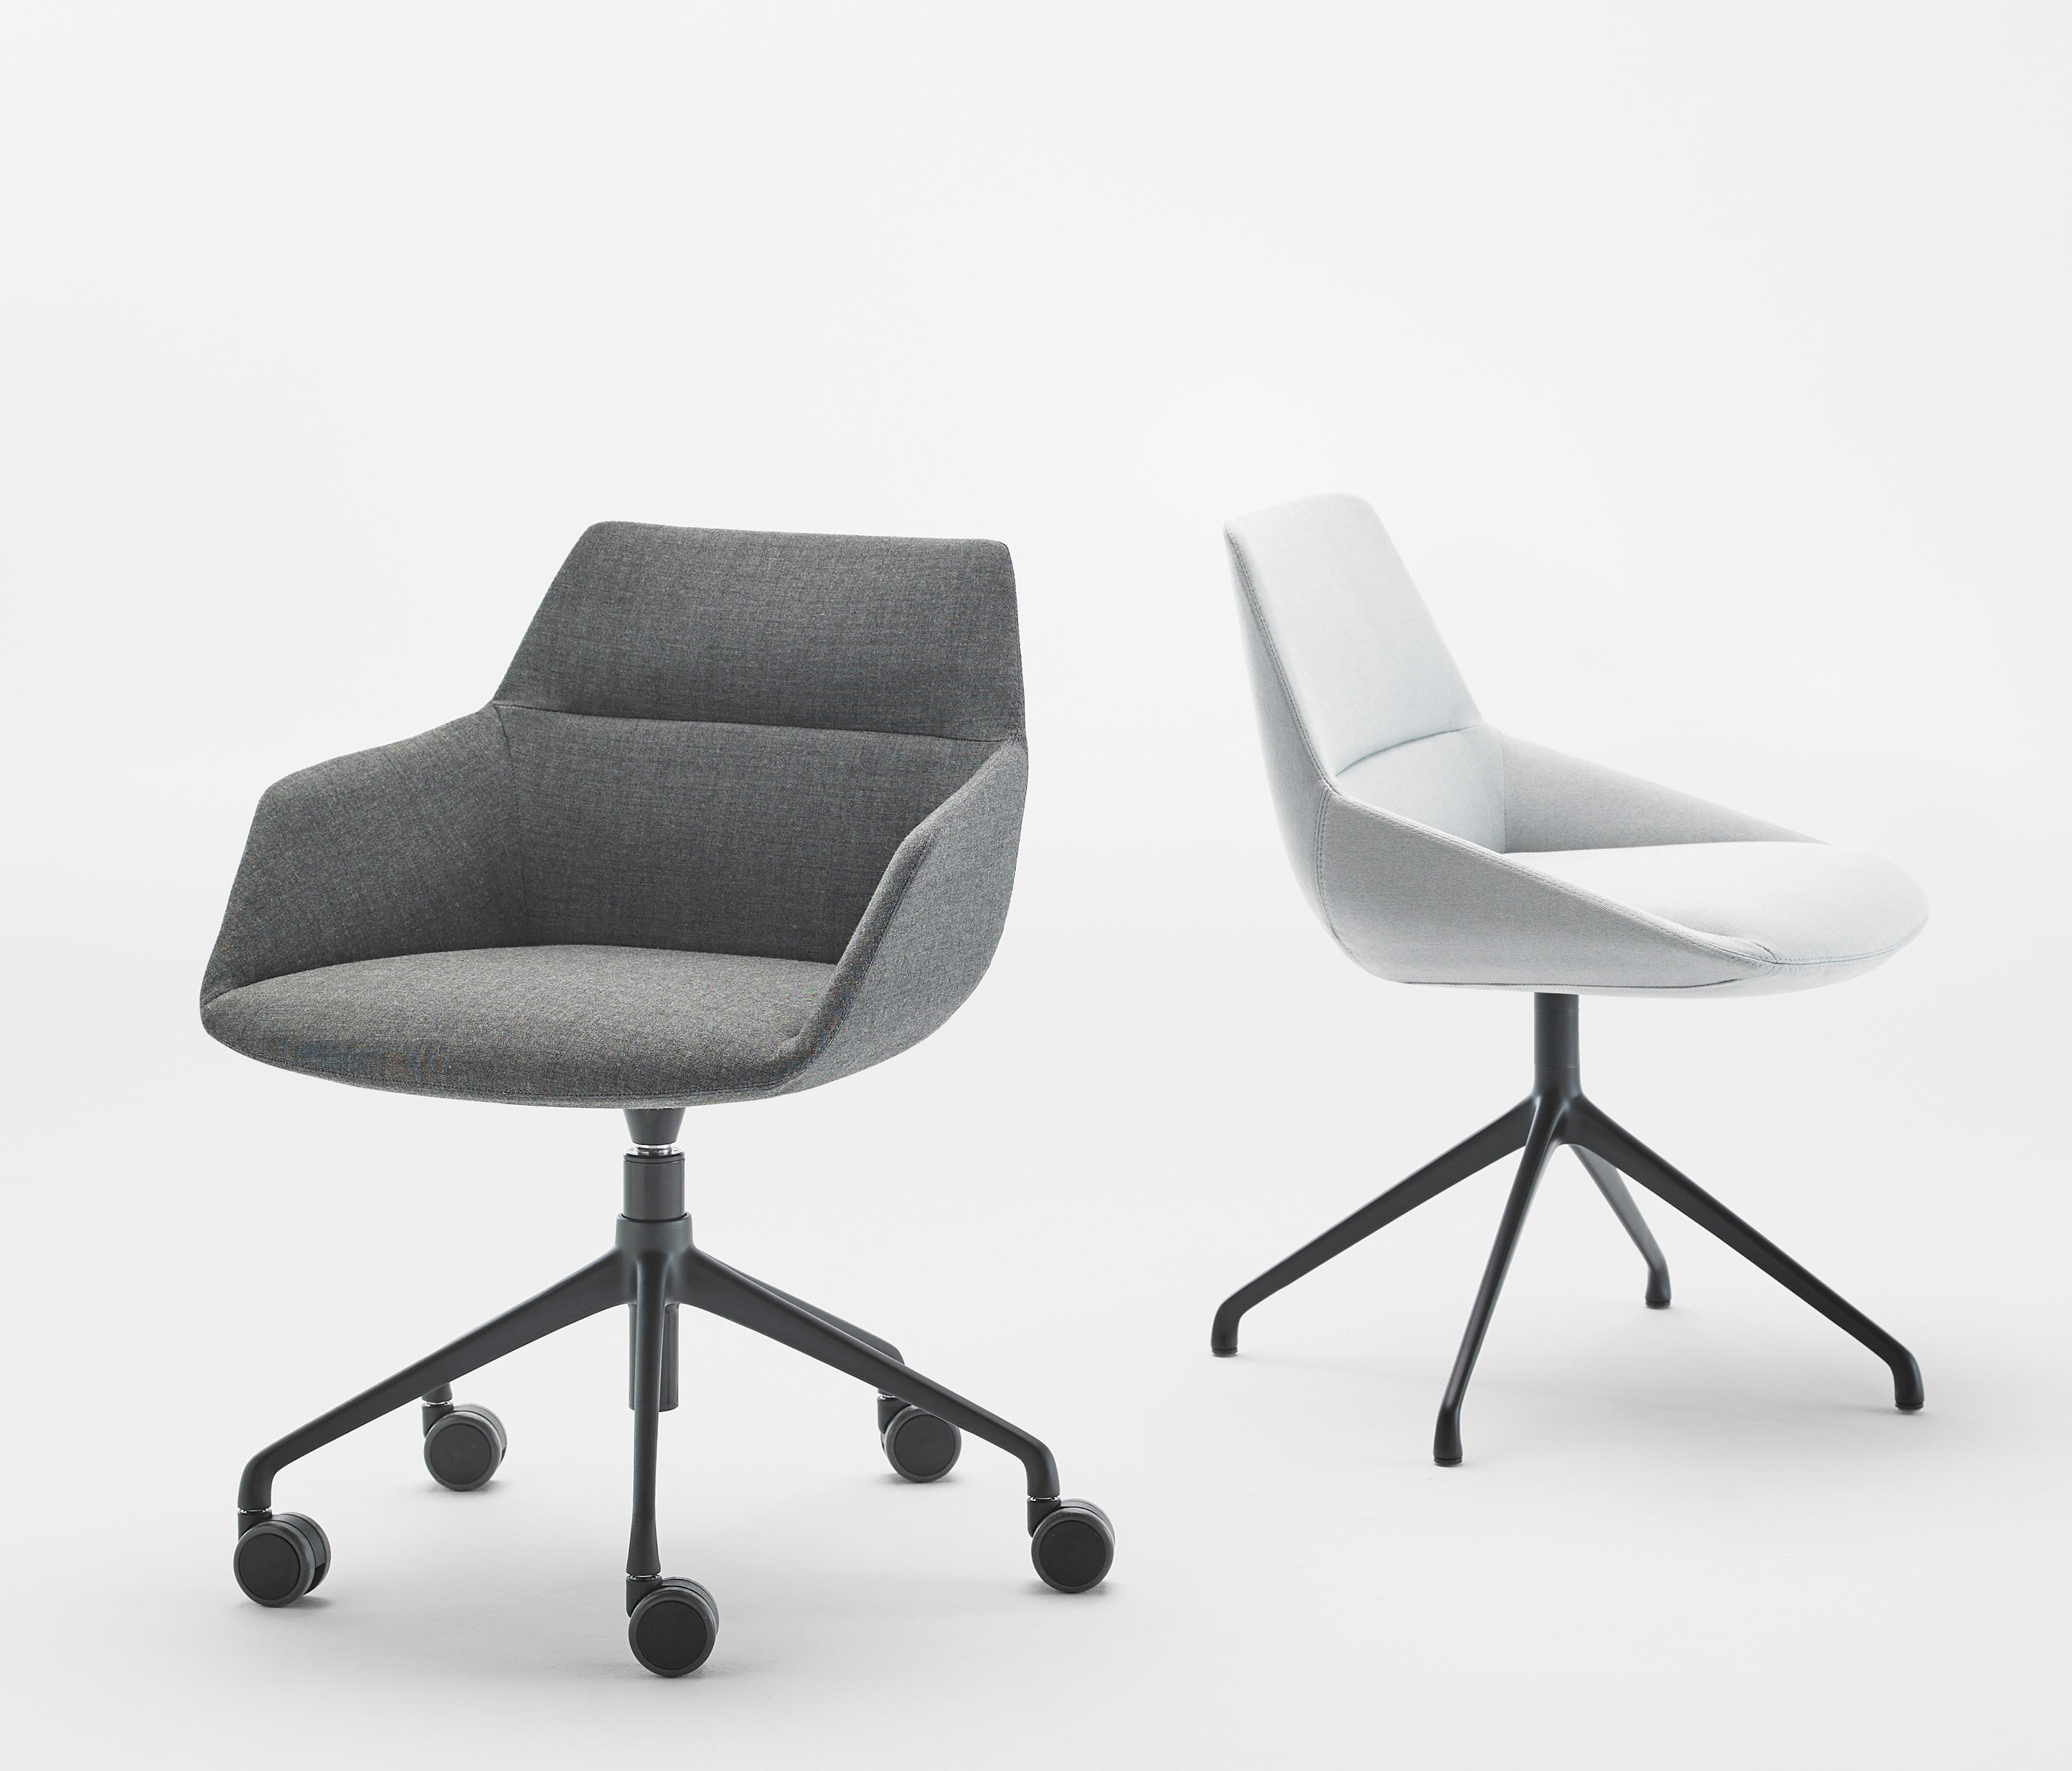 DUNAS XS - Chairs from Inclass | Architonic